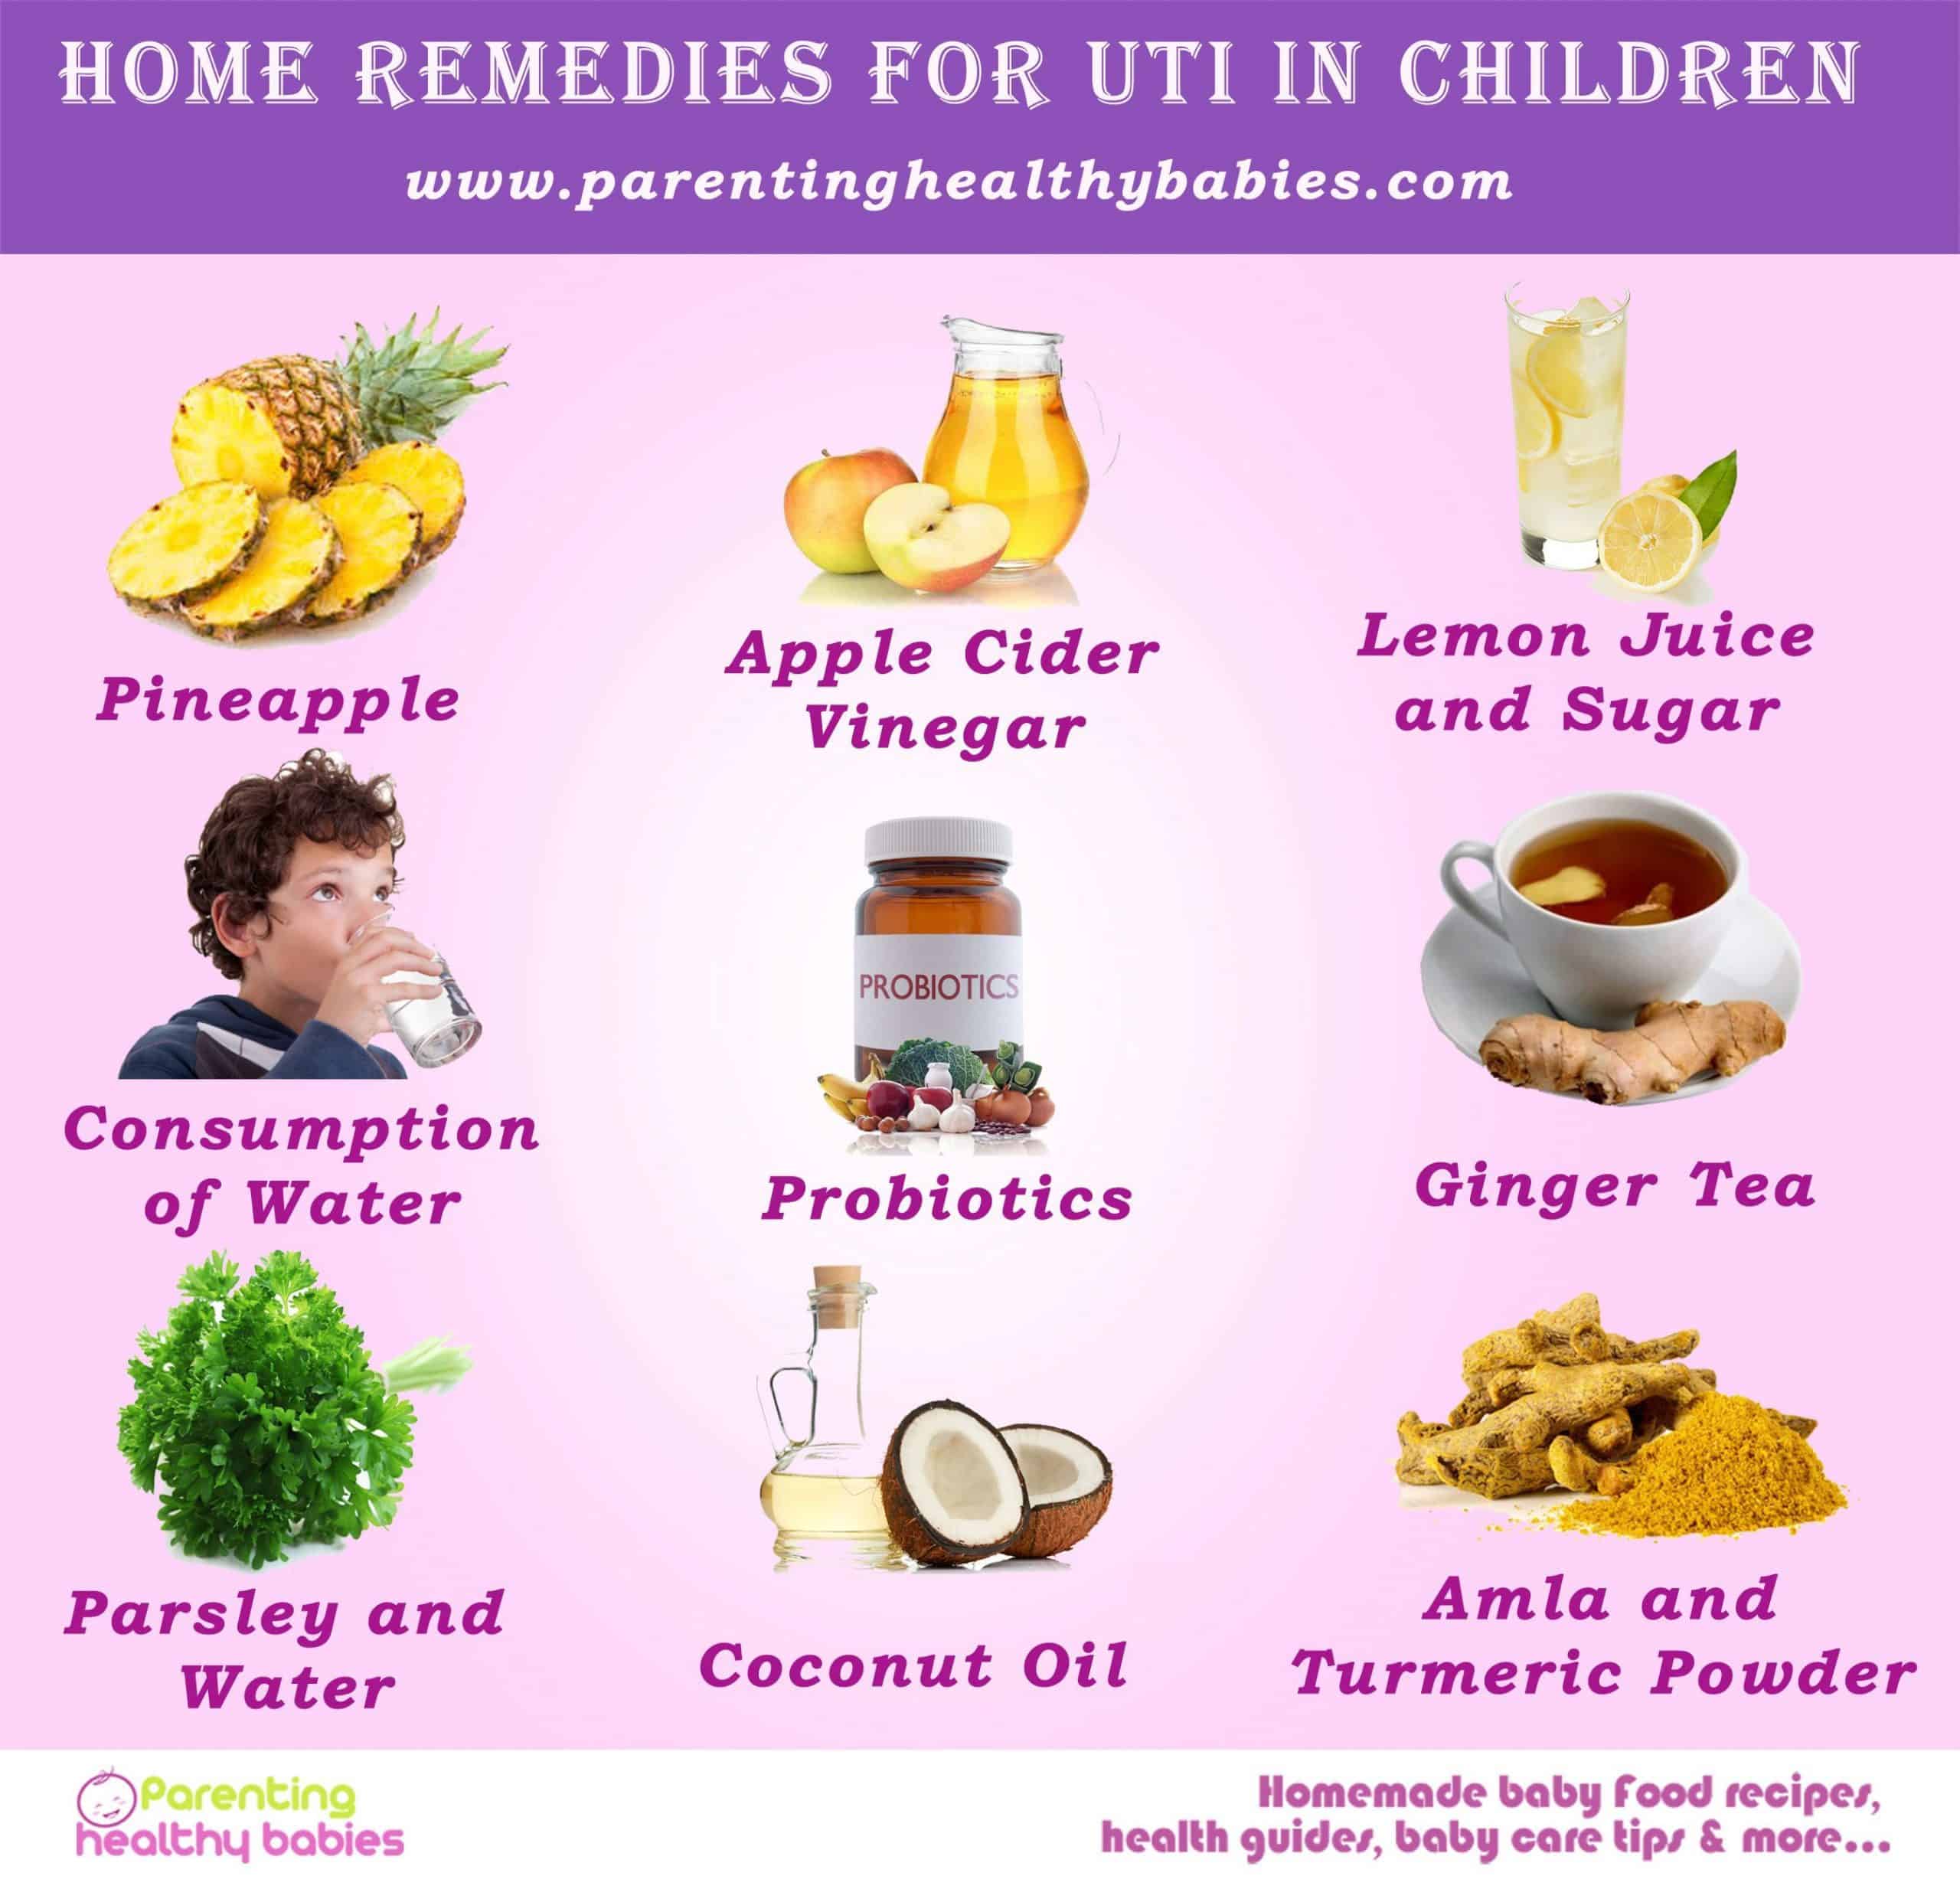 Pin on Home remedies